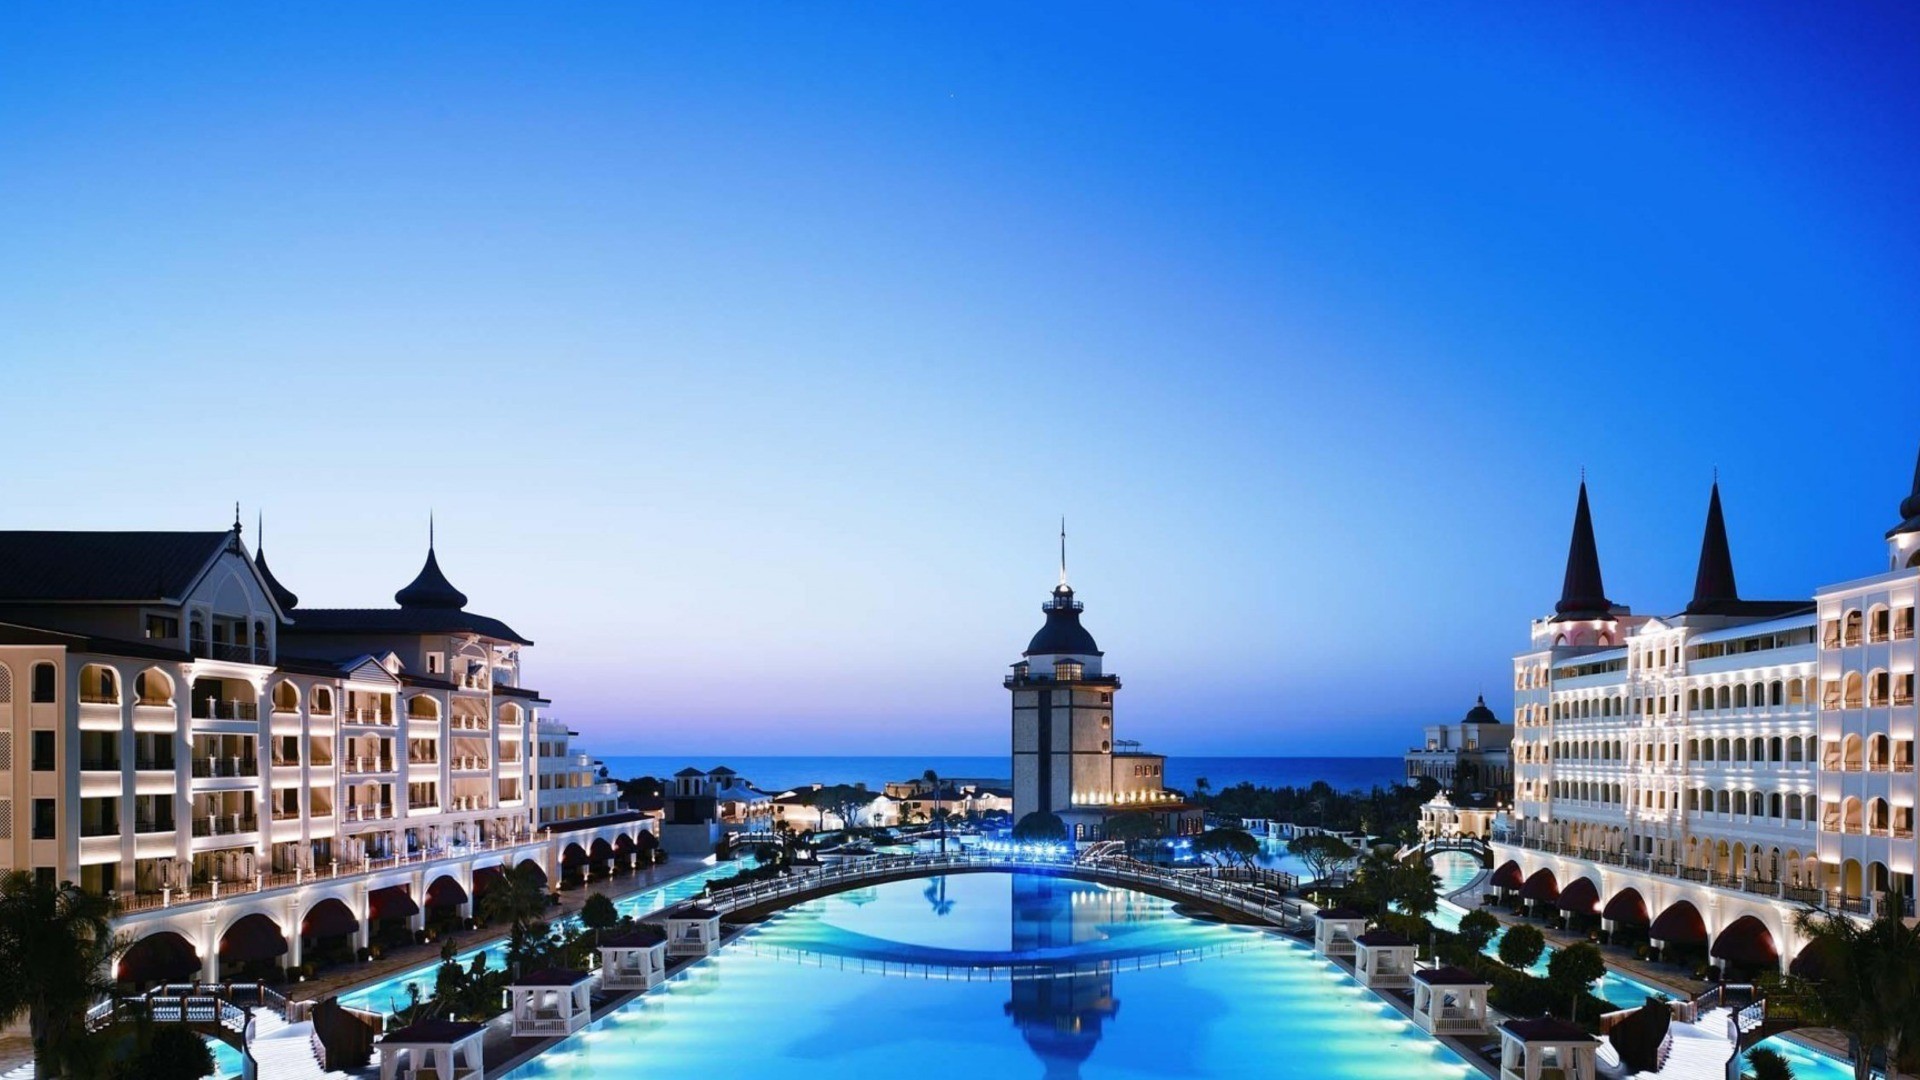 Turkey antalya palace wallpapers hd desktop and mobile backgrounds